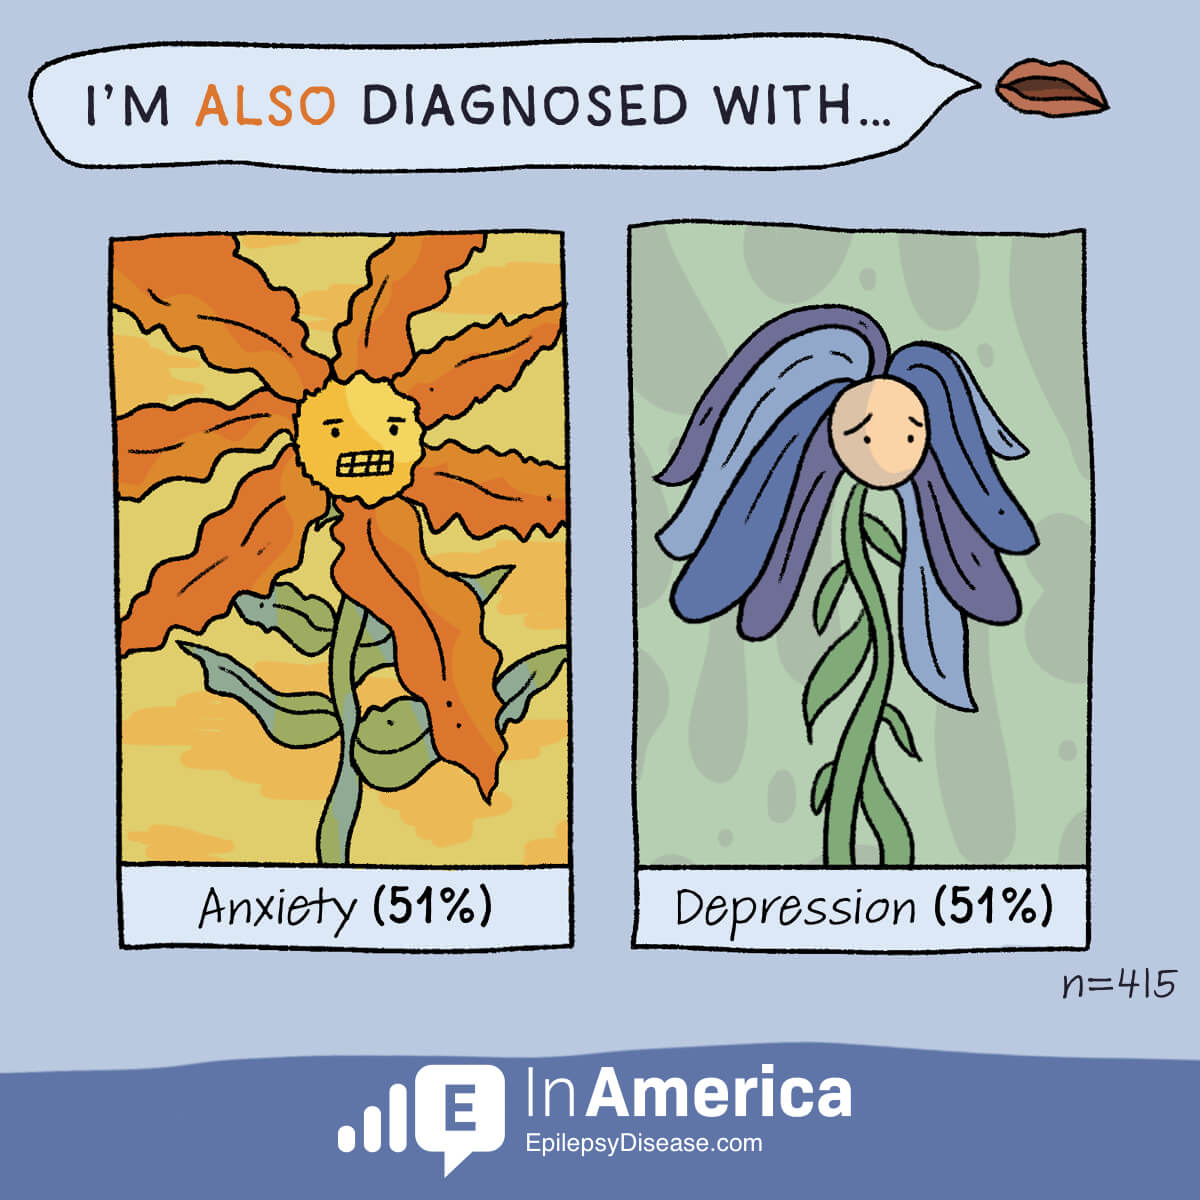 51% are diagnosed with anxiety and 51% are diagnosed with depression.